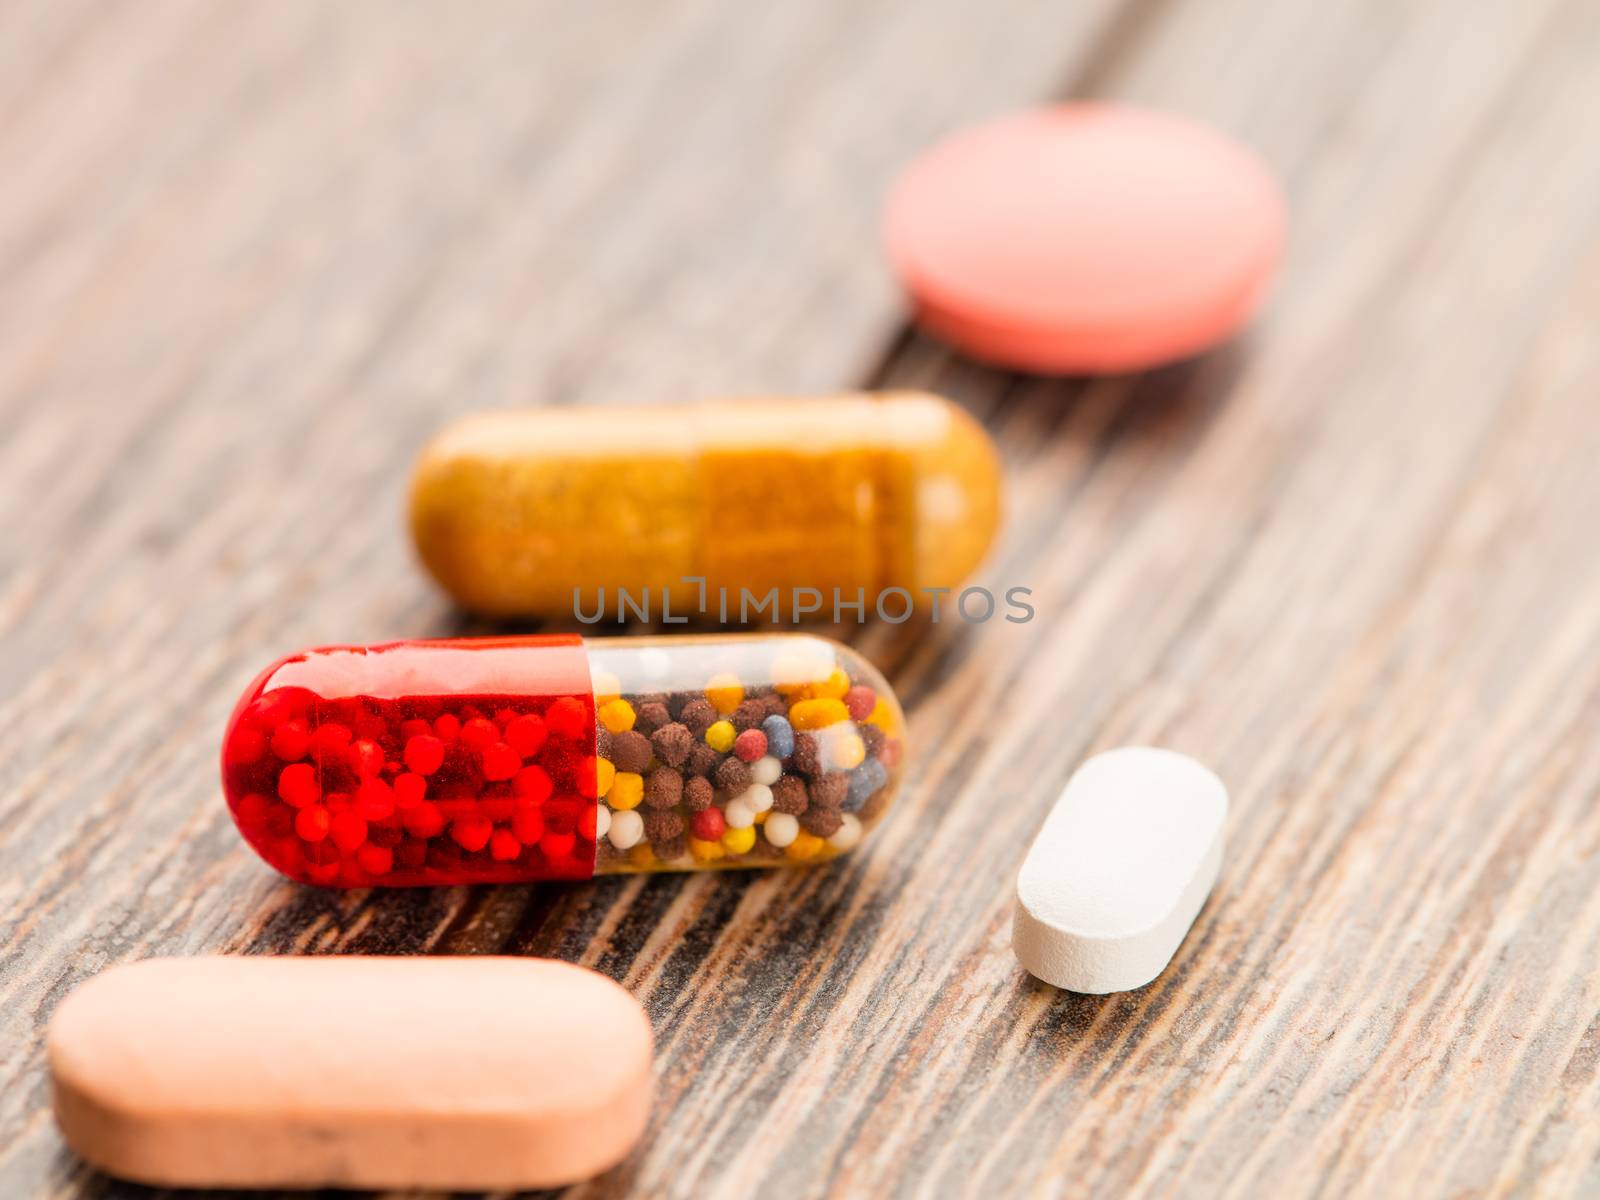 Tablets and capsules in a lid on a wooden table